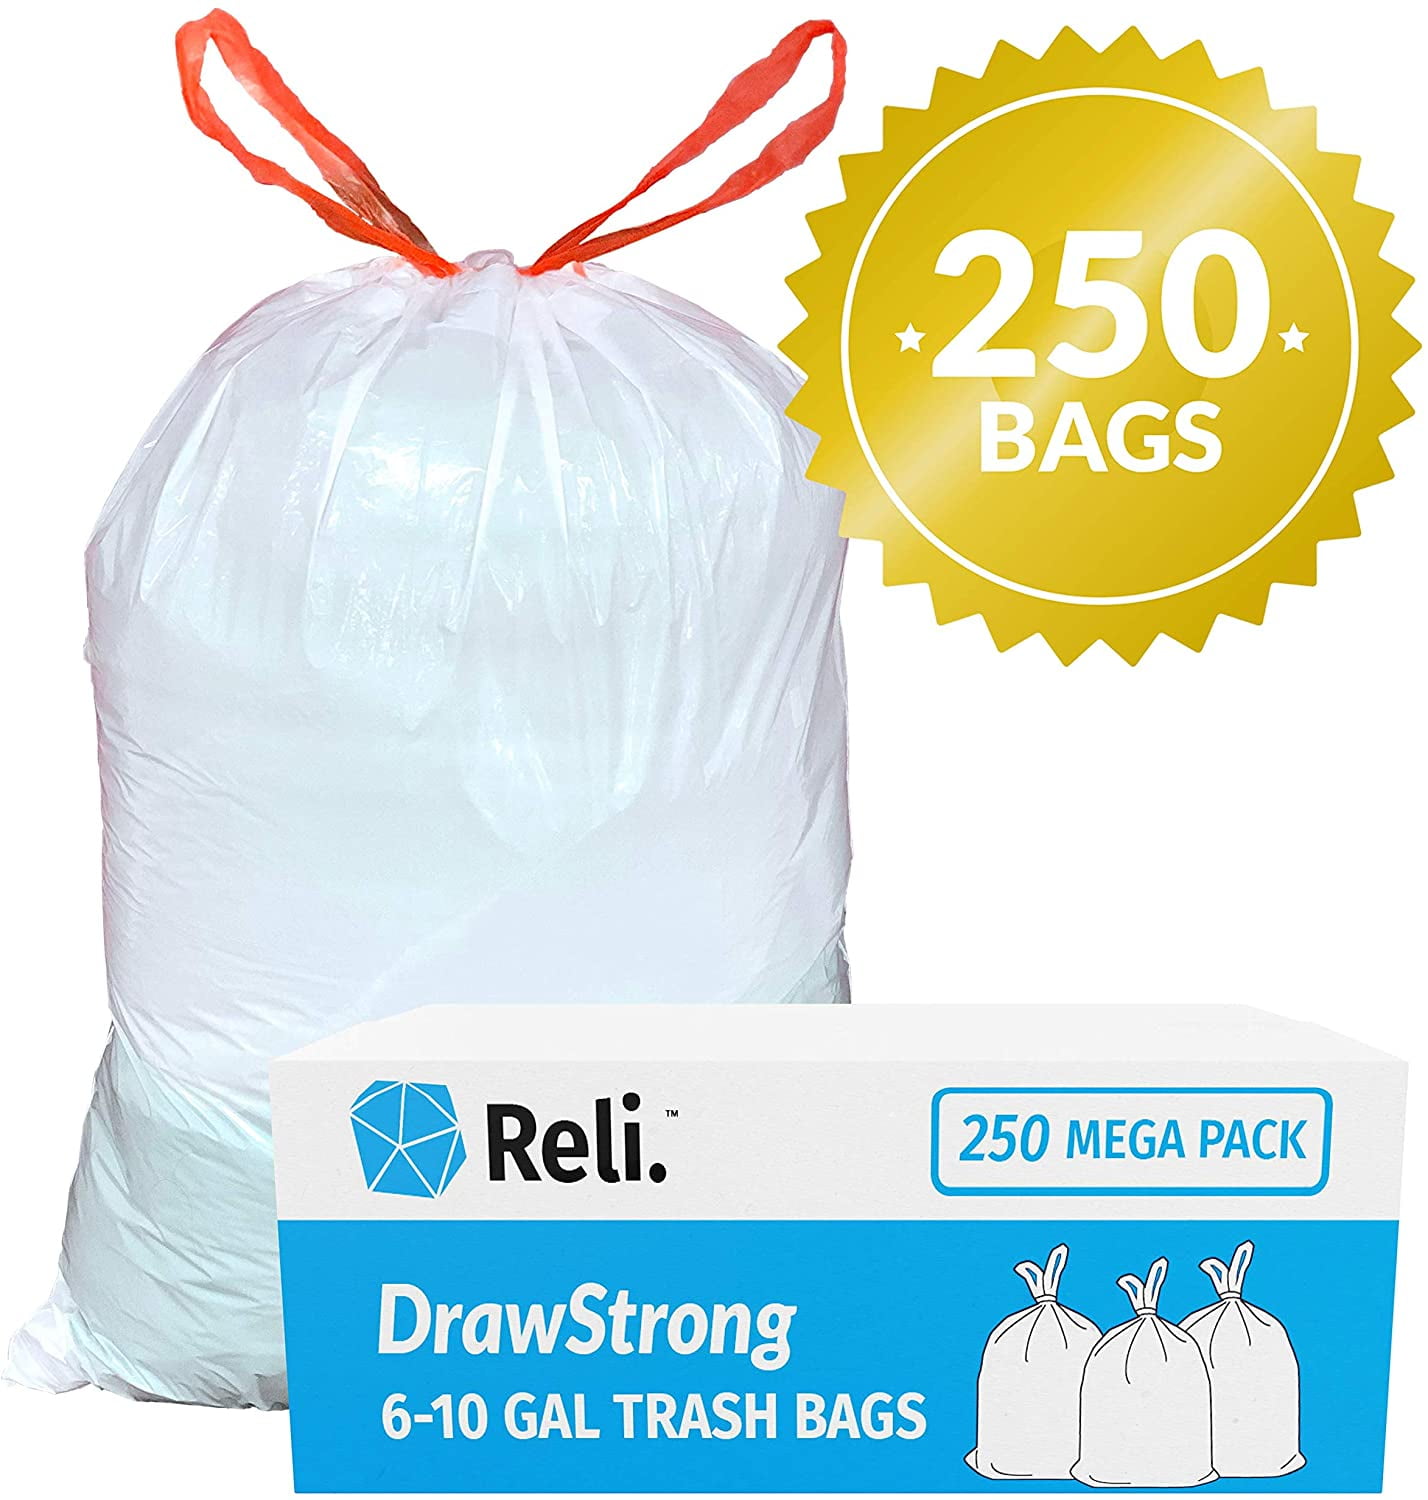 1 Roll of 100 Bags. 100 Trash Can Liners 100 Clear Commercial Trash Can Liners Plastic Bags for Small Wastebaskets 10 Gallon Size Bags to Fit 6 to 8 Gallon Size Trash Cans